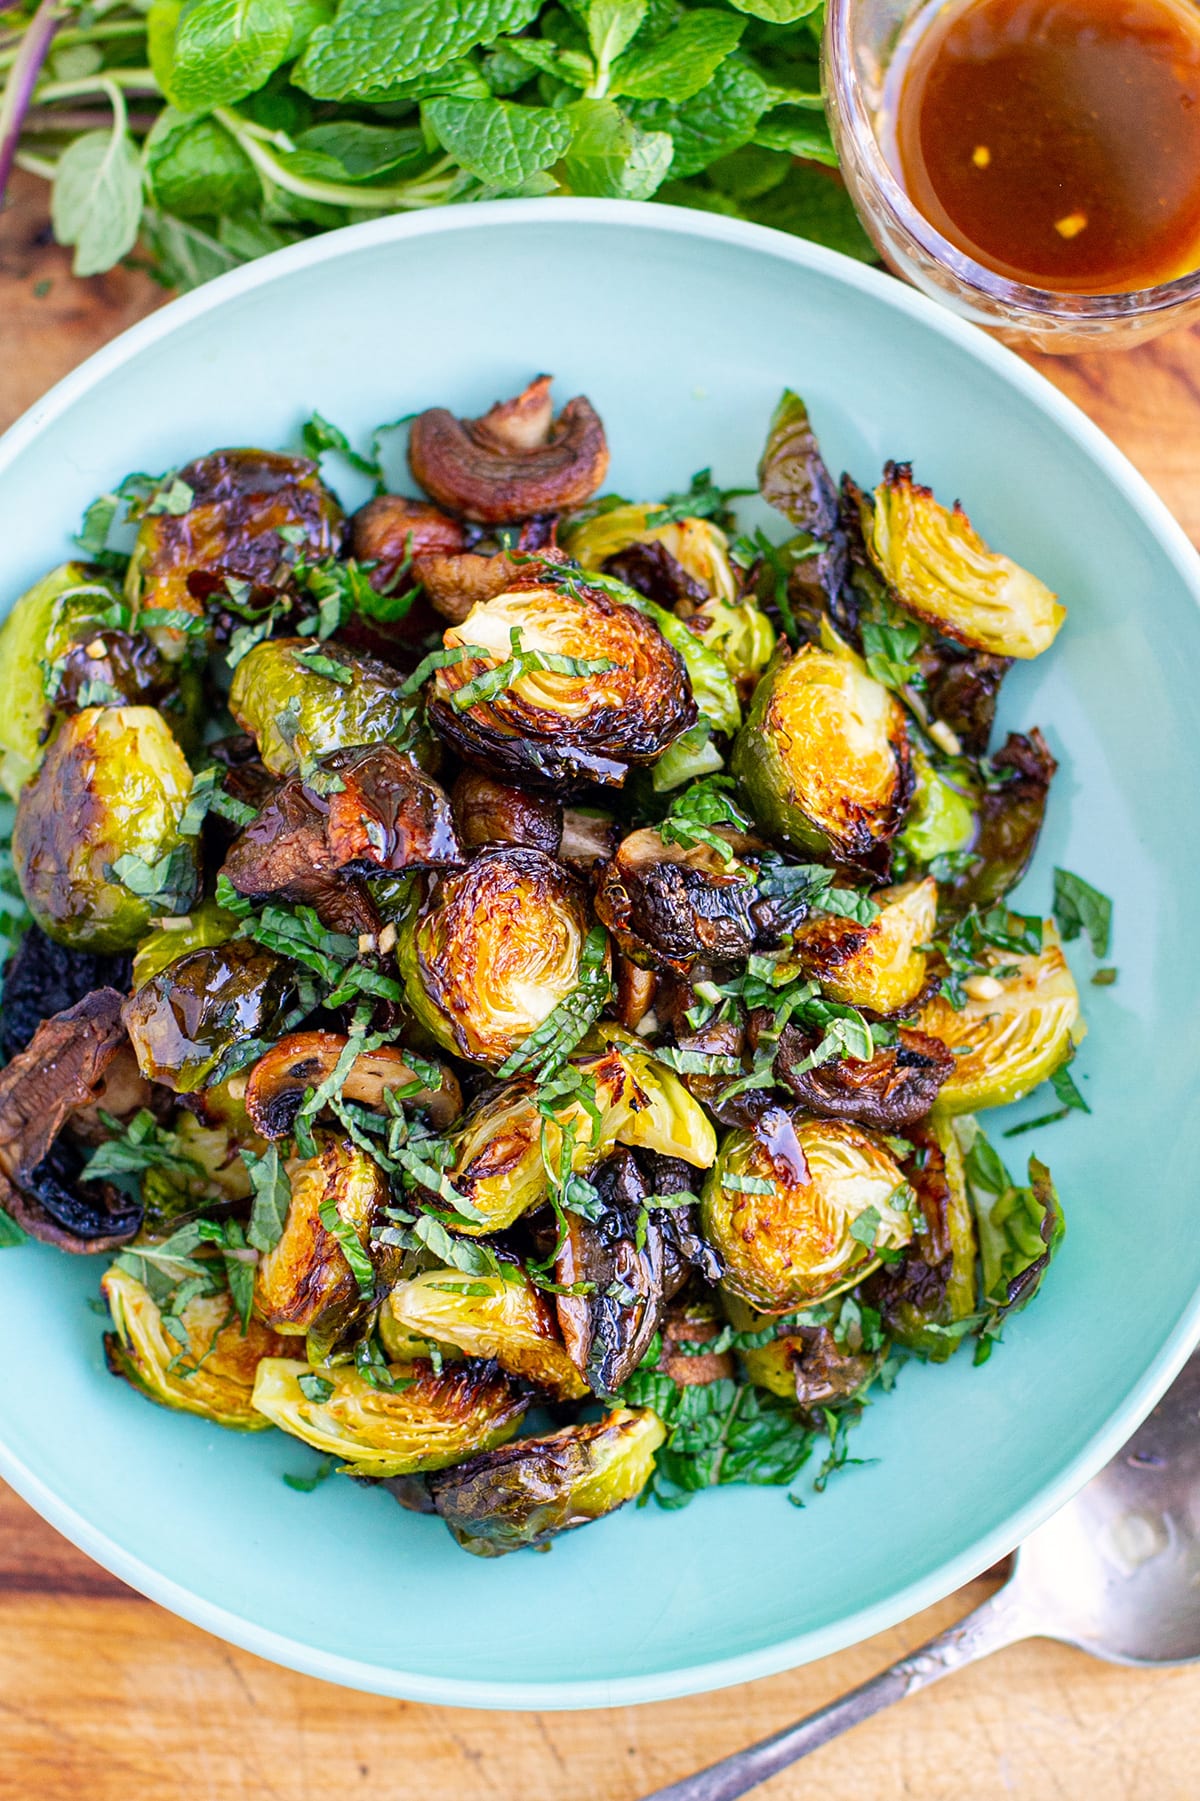 Roasted Brussel sprouts with Honey Balsamic Dressing in bowl with extra dressing on the side.